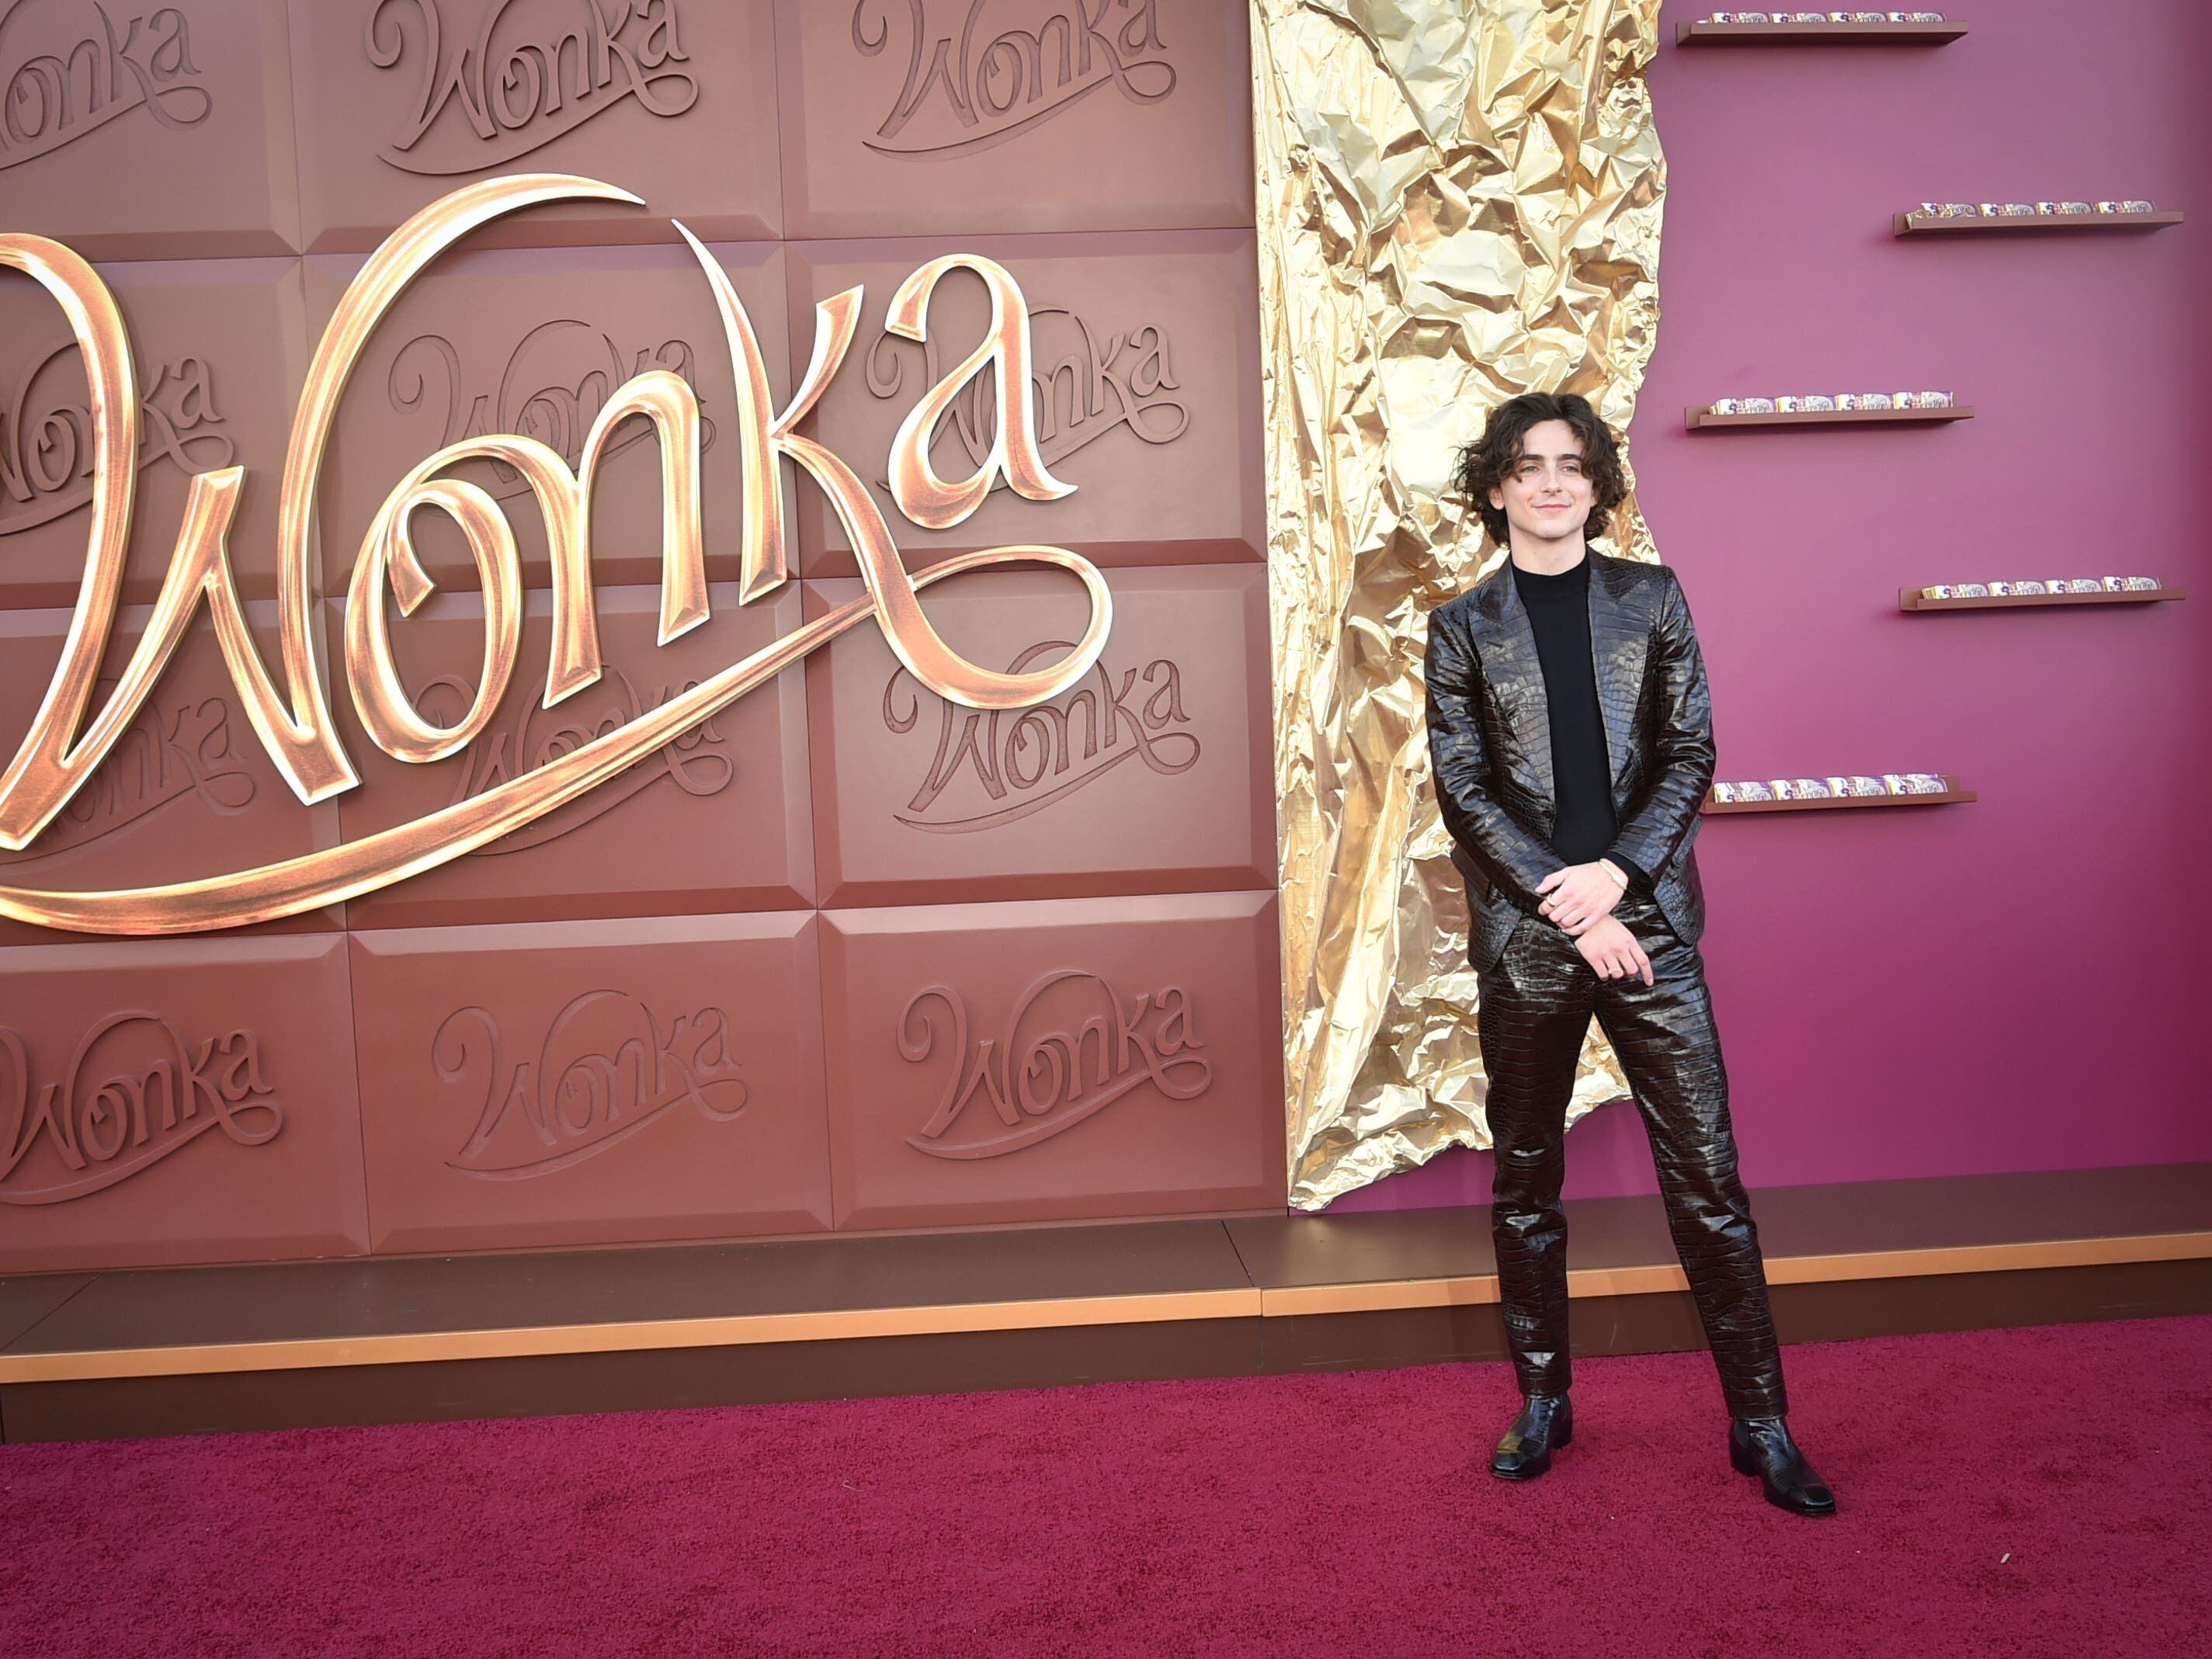 Wonka ends the year at number one at the US box office